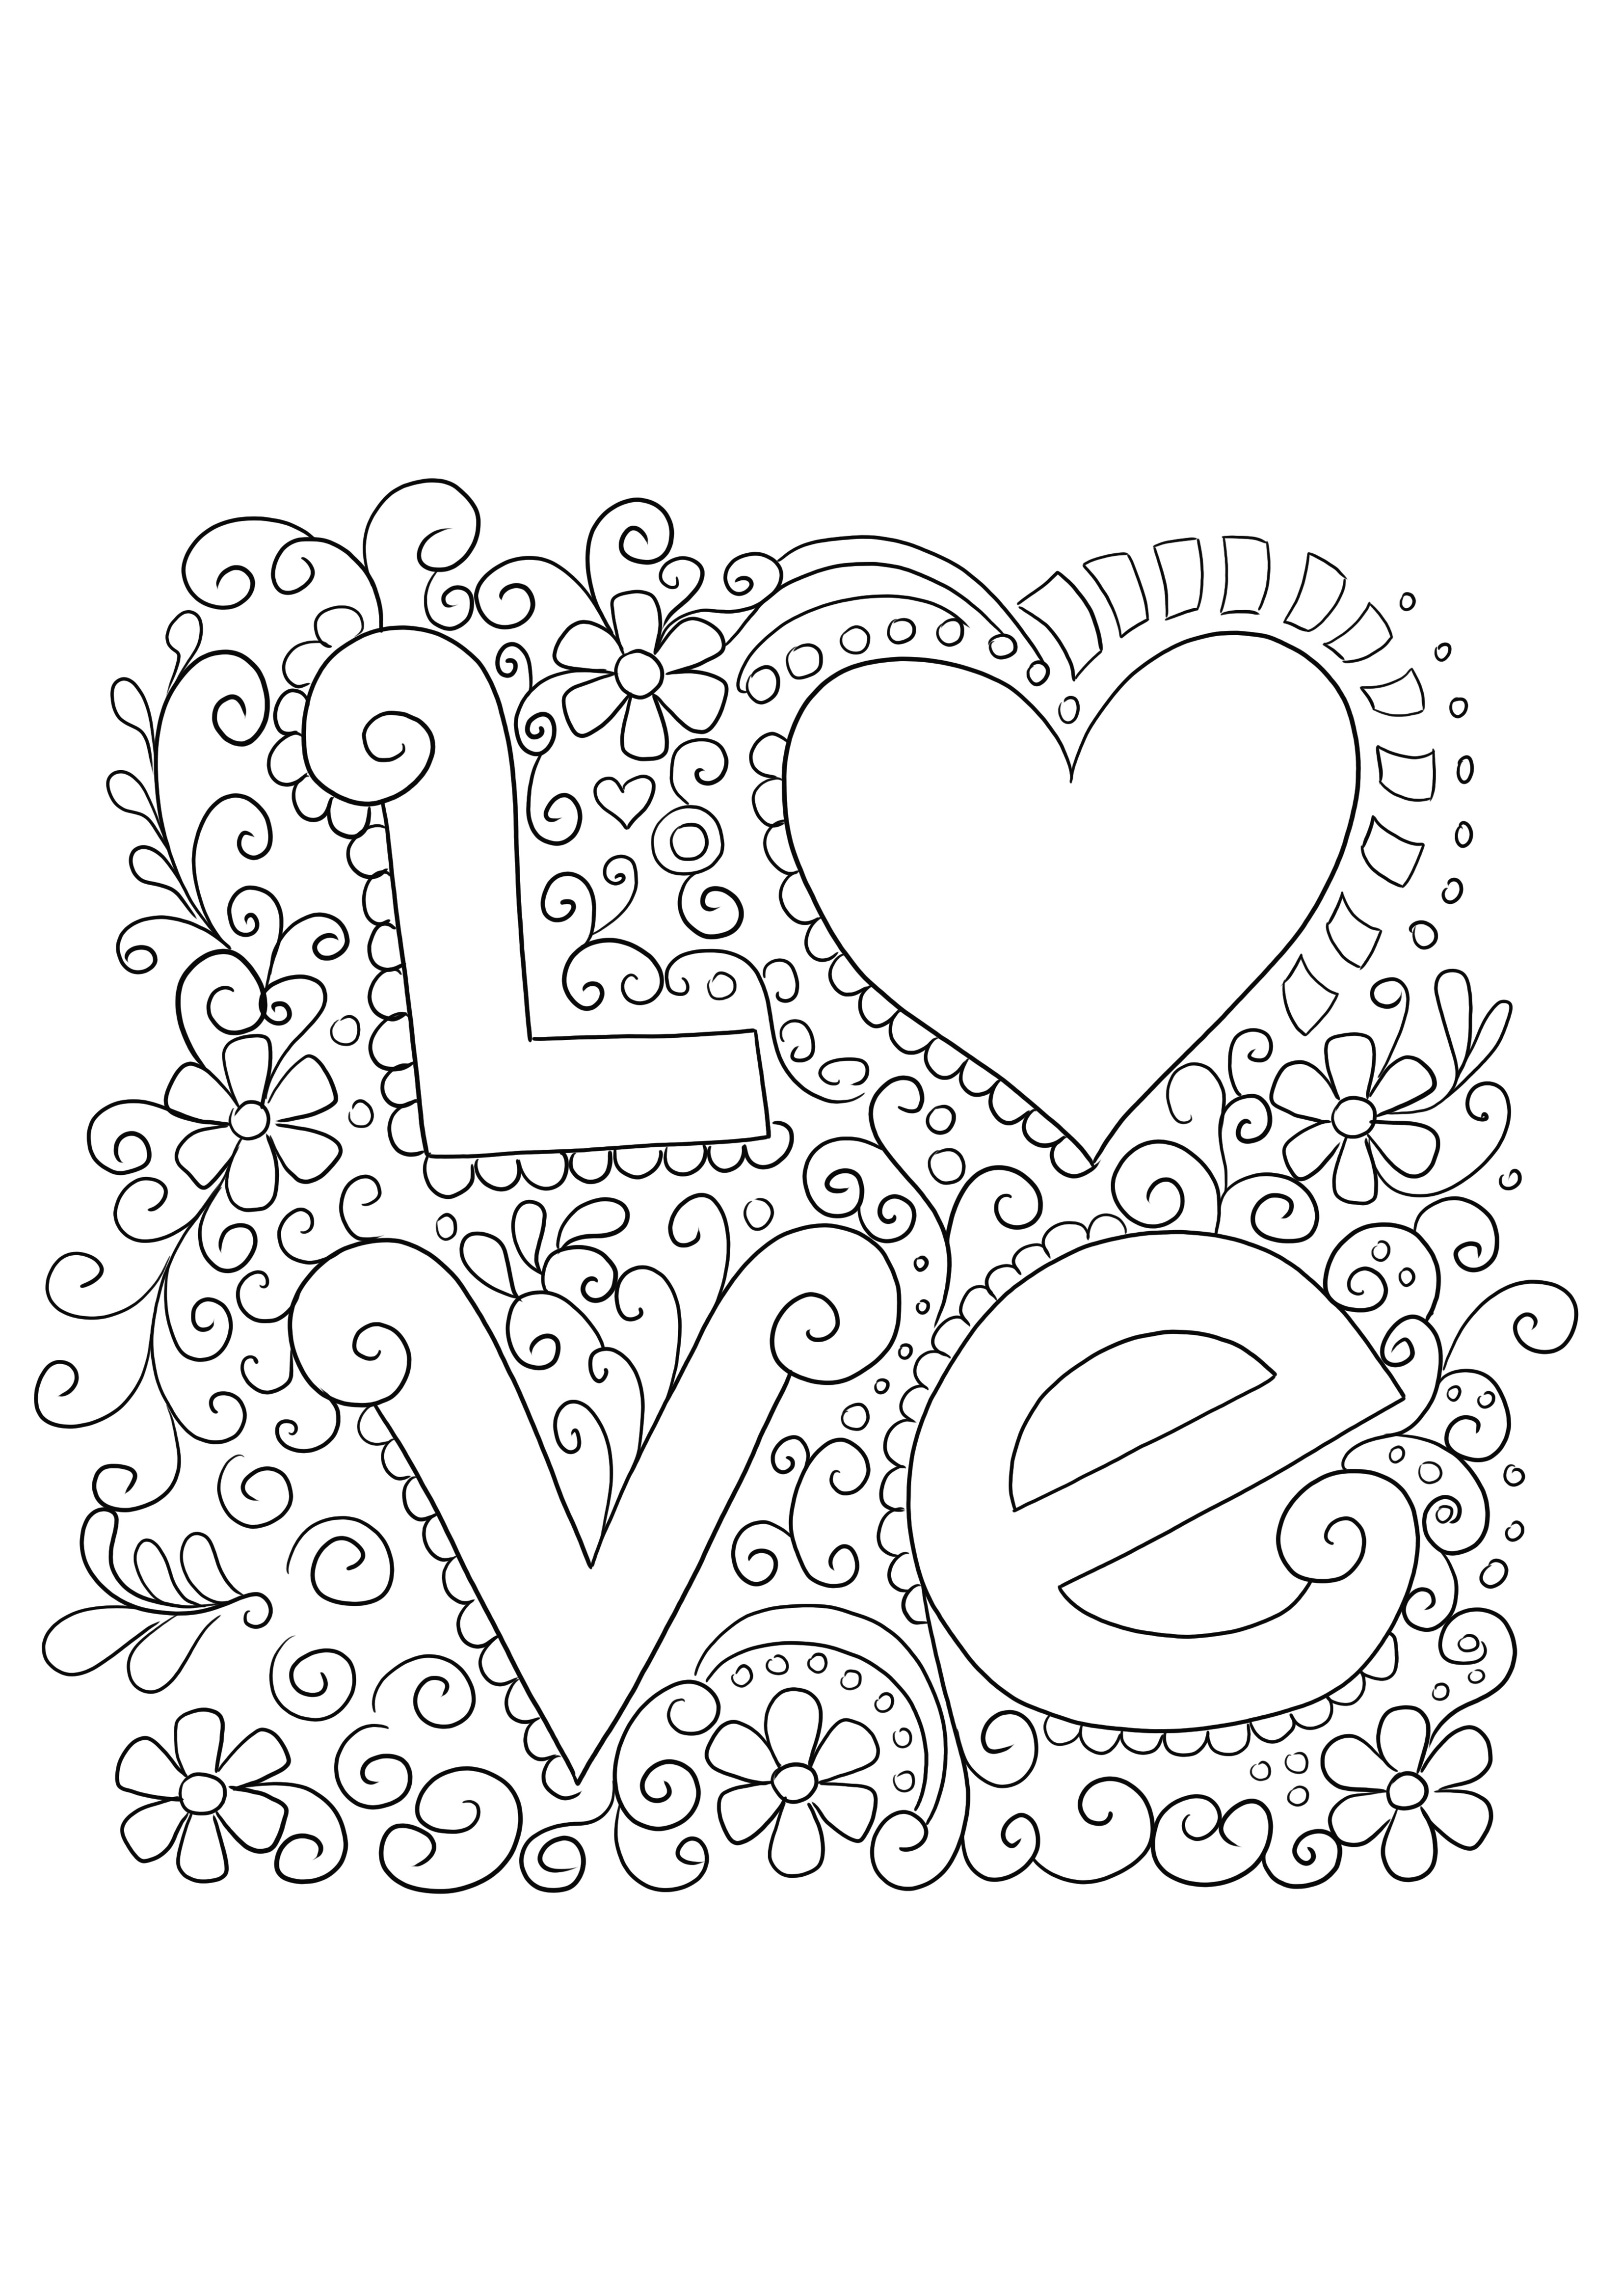 Easy and free Love card printable to color and celebrate Valentine's Day